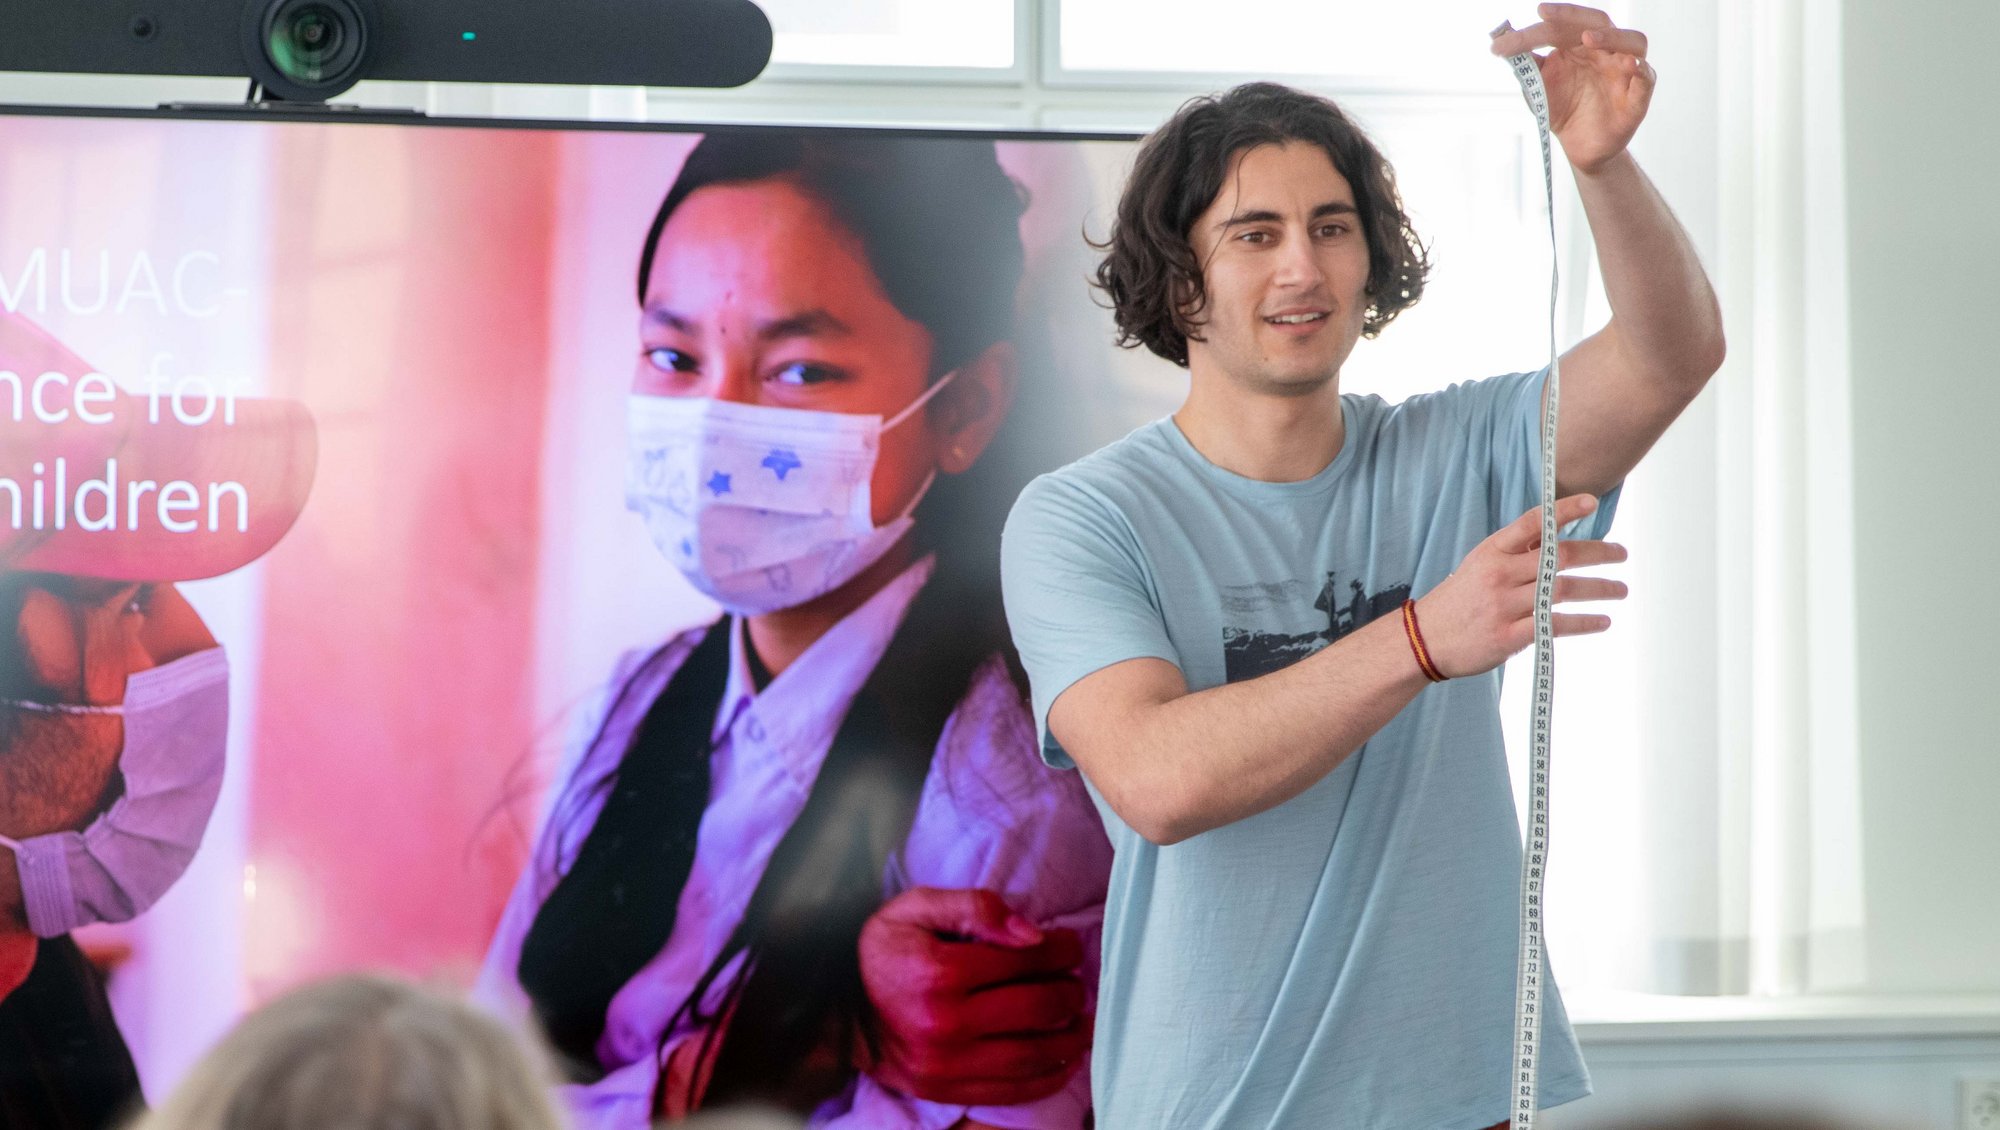 Adam Flensborg Safikhany (medicine) received the prize for his project on upper arm growth curves in school children. Photo: Simon Fischel, AU Health.